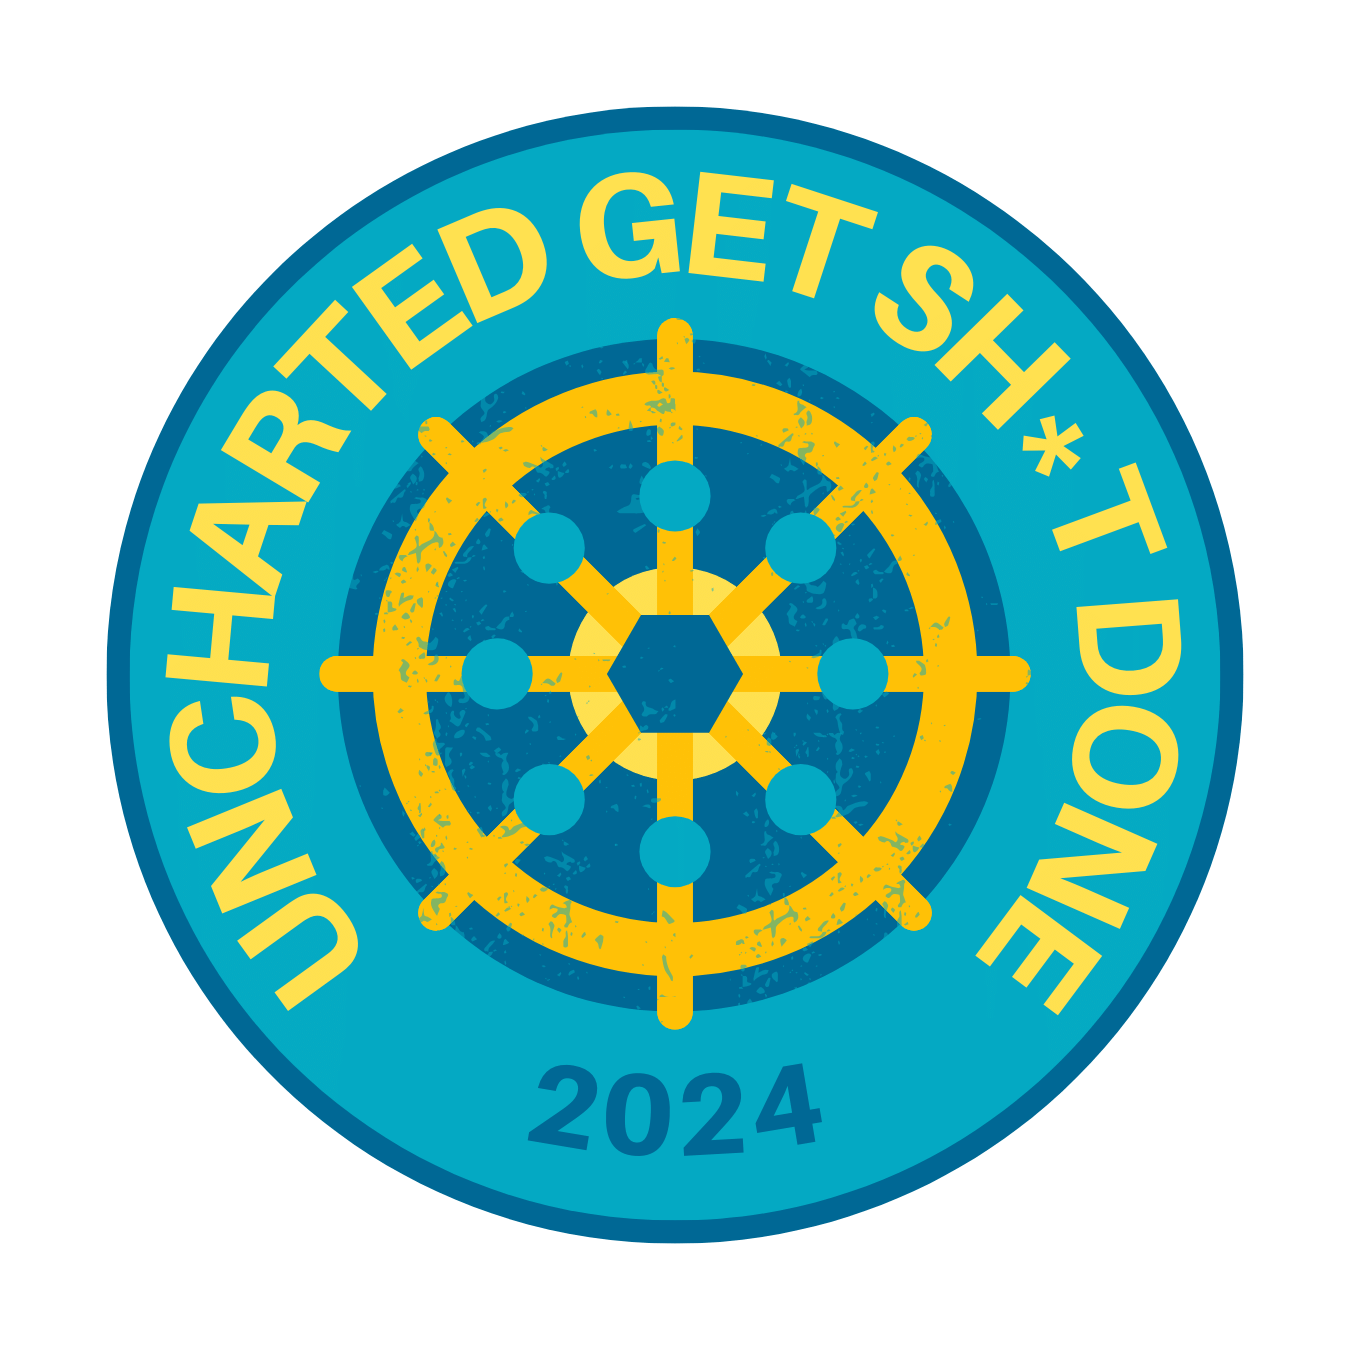 Uncharted Get Sh*t Done Conference 2024 logo